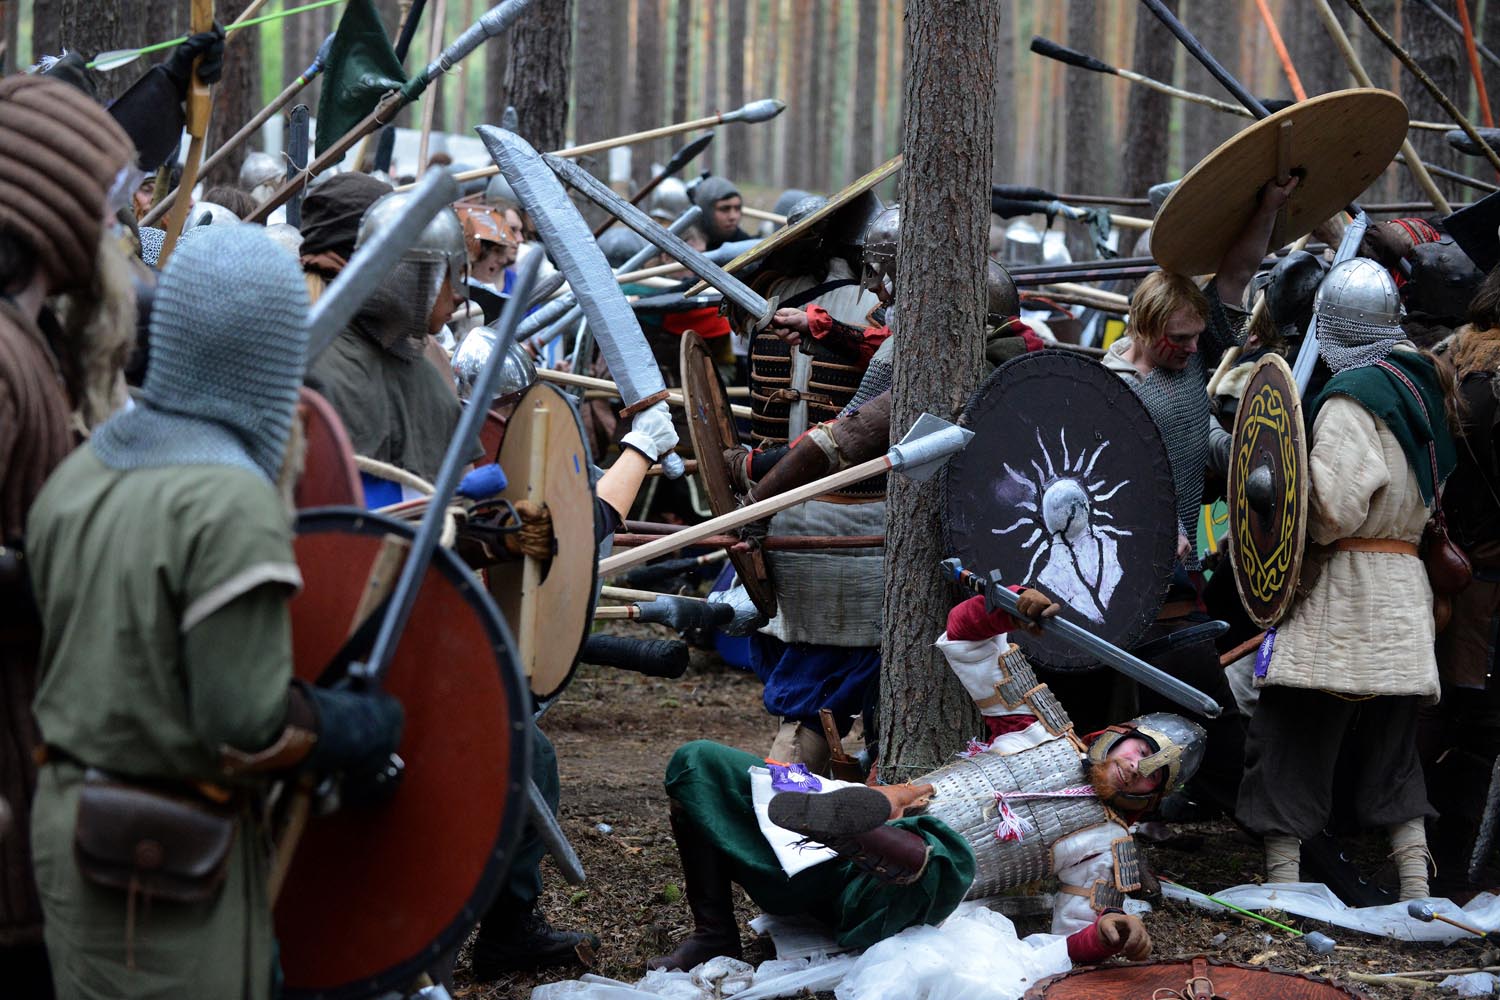 May 25, 2013. Fans dressed as characters from the Tolkien classic The Hobbit, take part in the reenactment of a battle in a forest near the village of Doksy, northern Czech Republic. Read the photographer's full backstory on the image here.